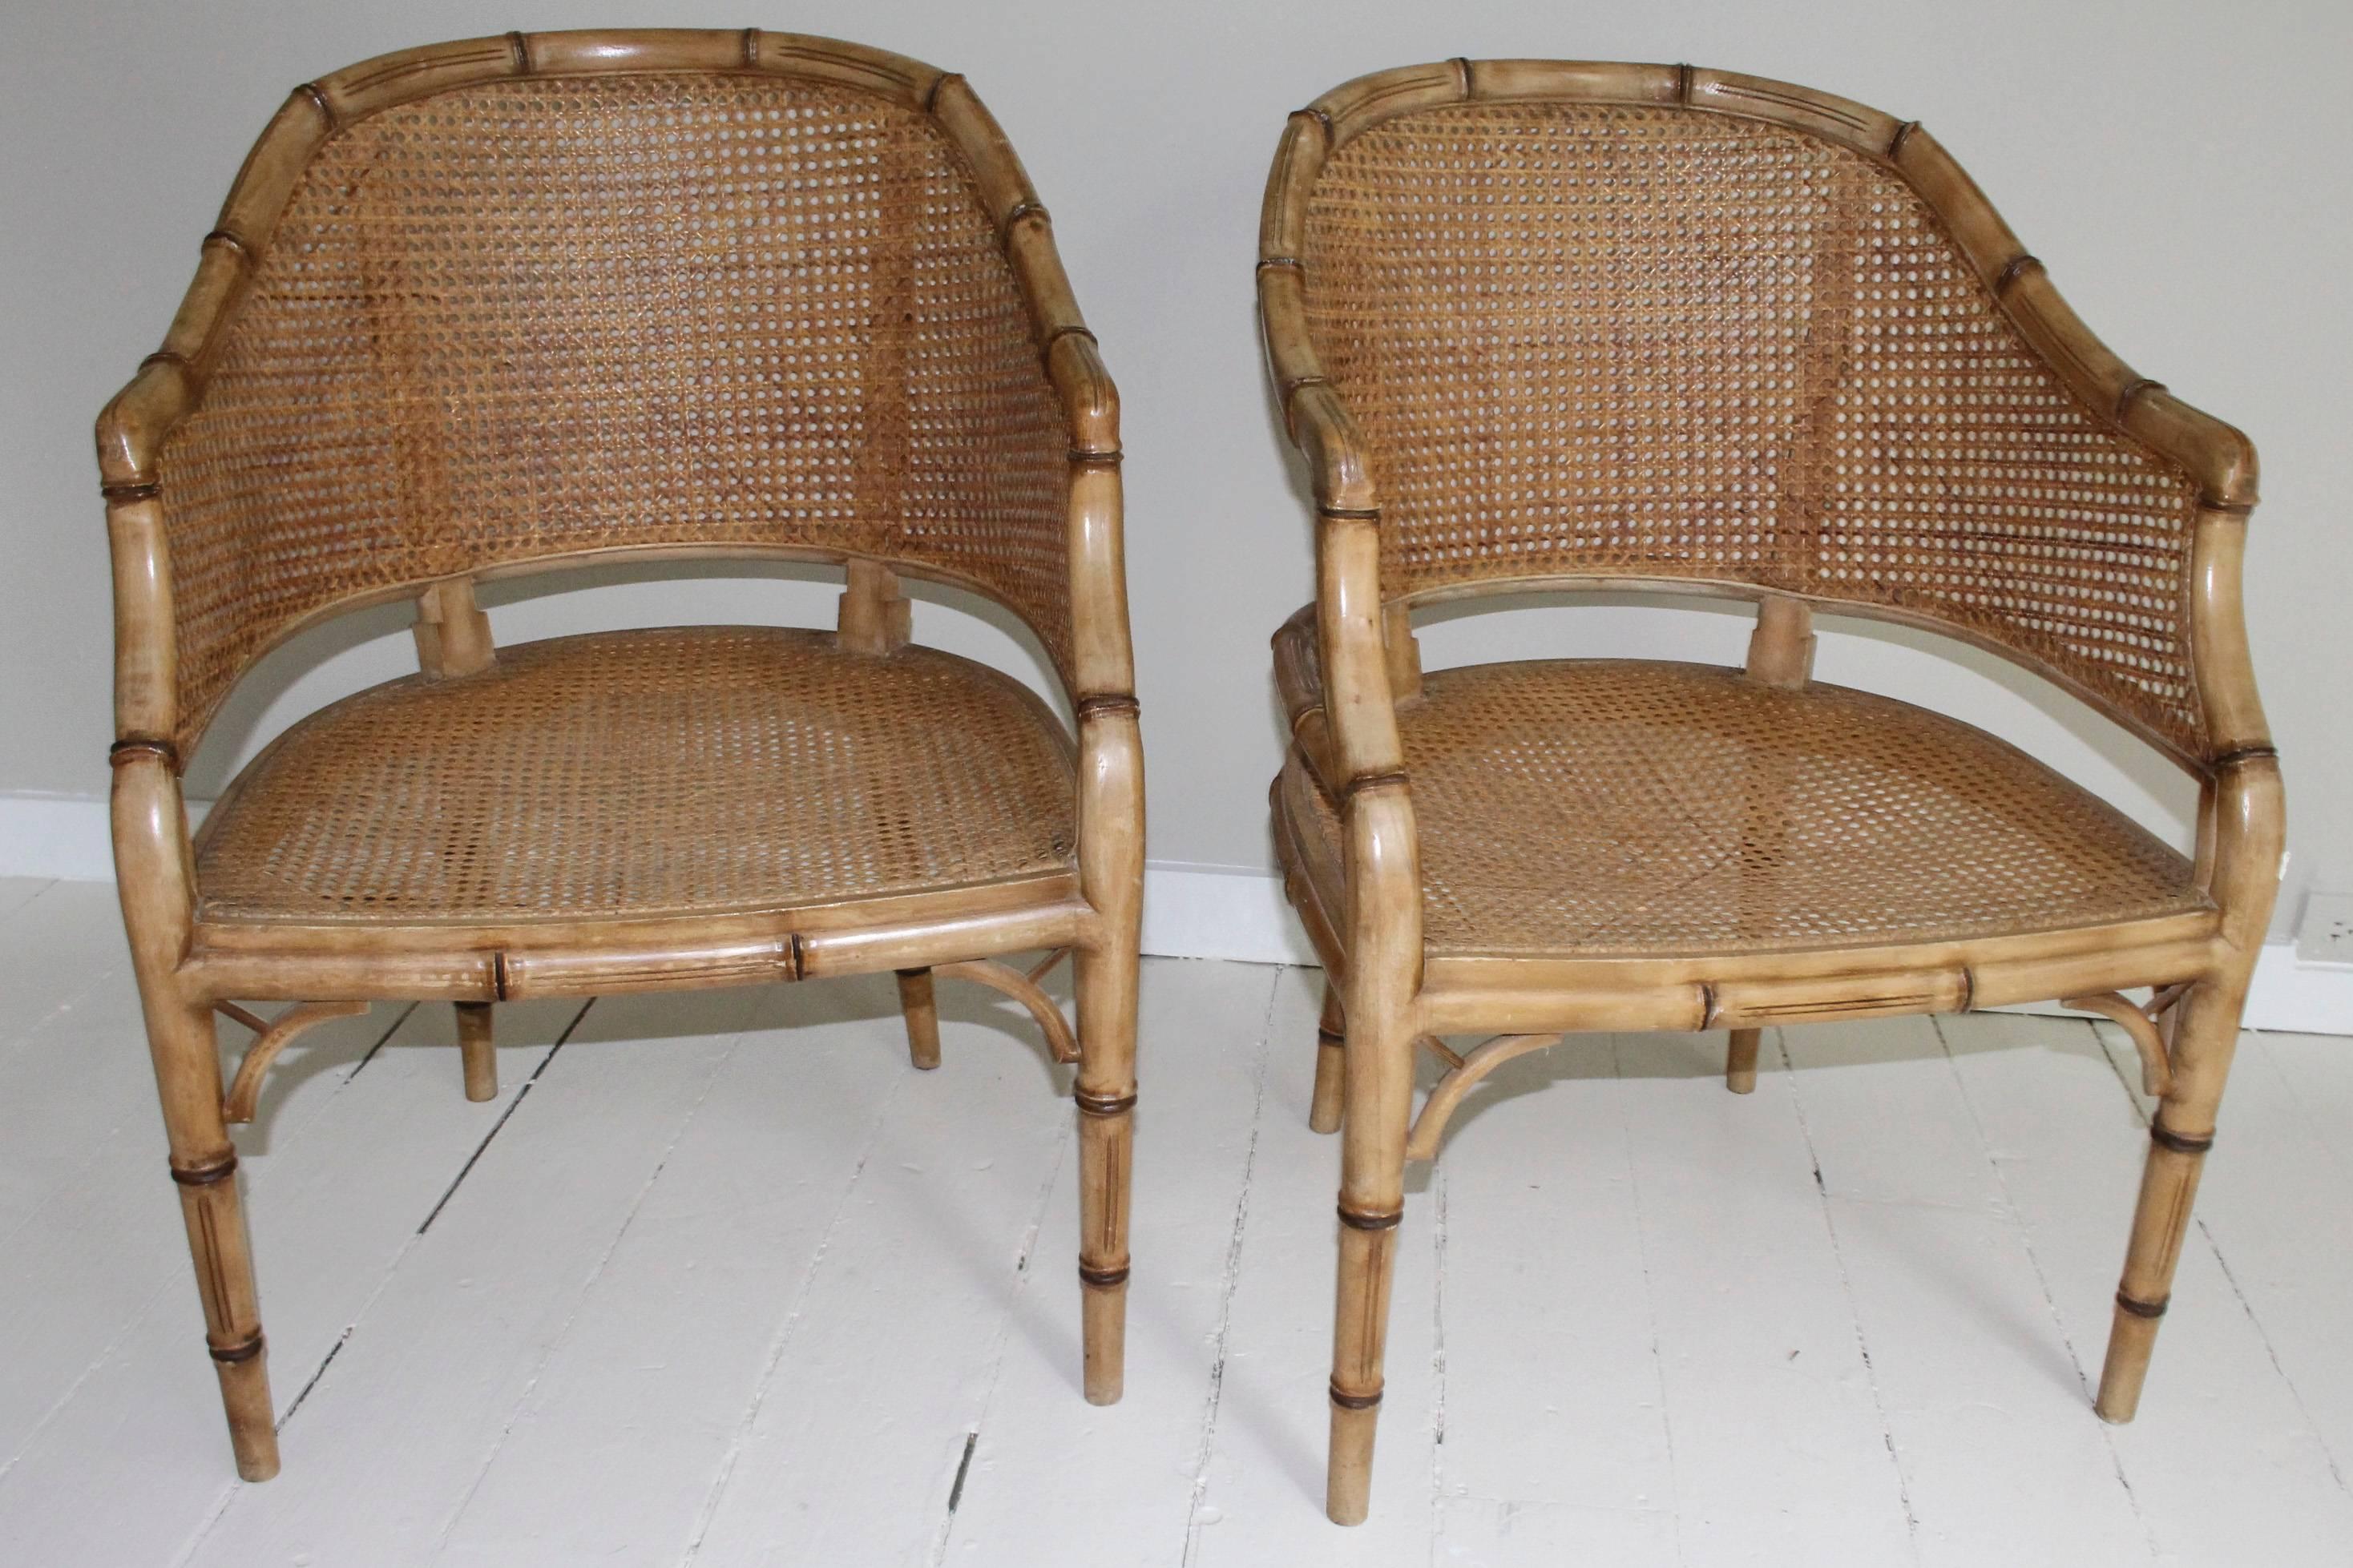 Pair of vintage French faux bamboo wood armchairs with Classic chinoiserie details, circa 1940s, with tub shaped backs, cane seats and backrest. Cushions included will need recovering.